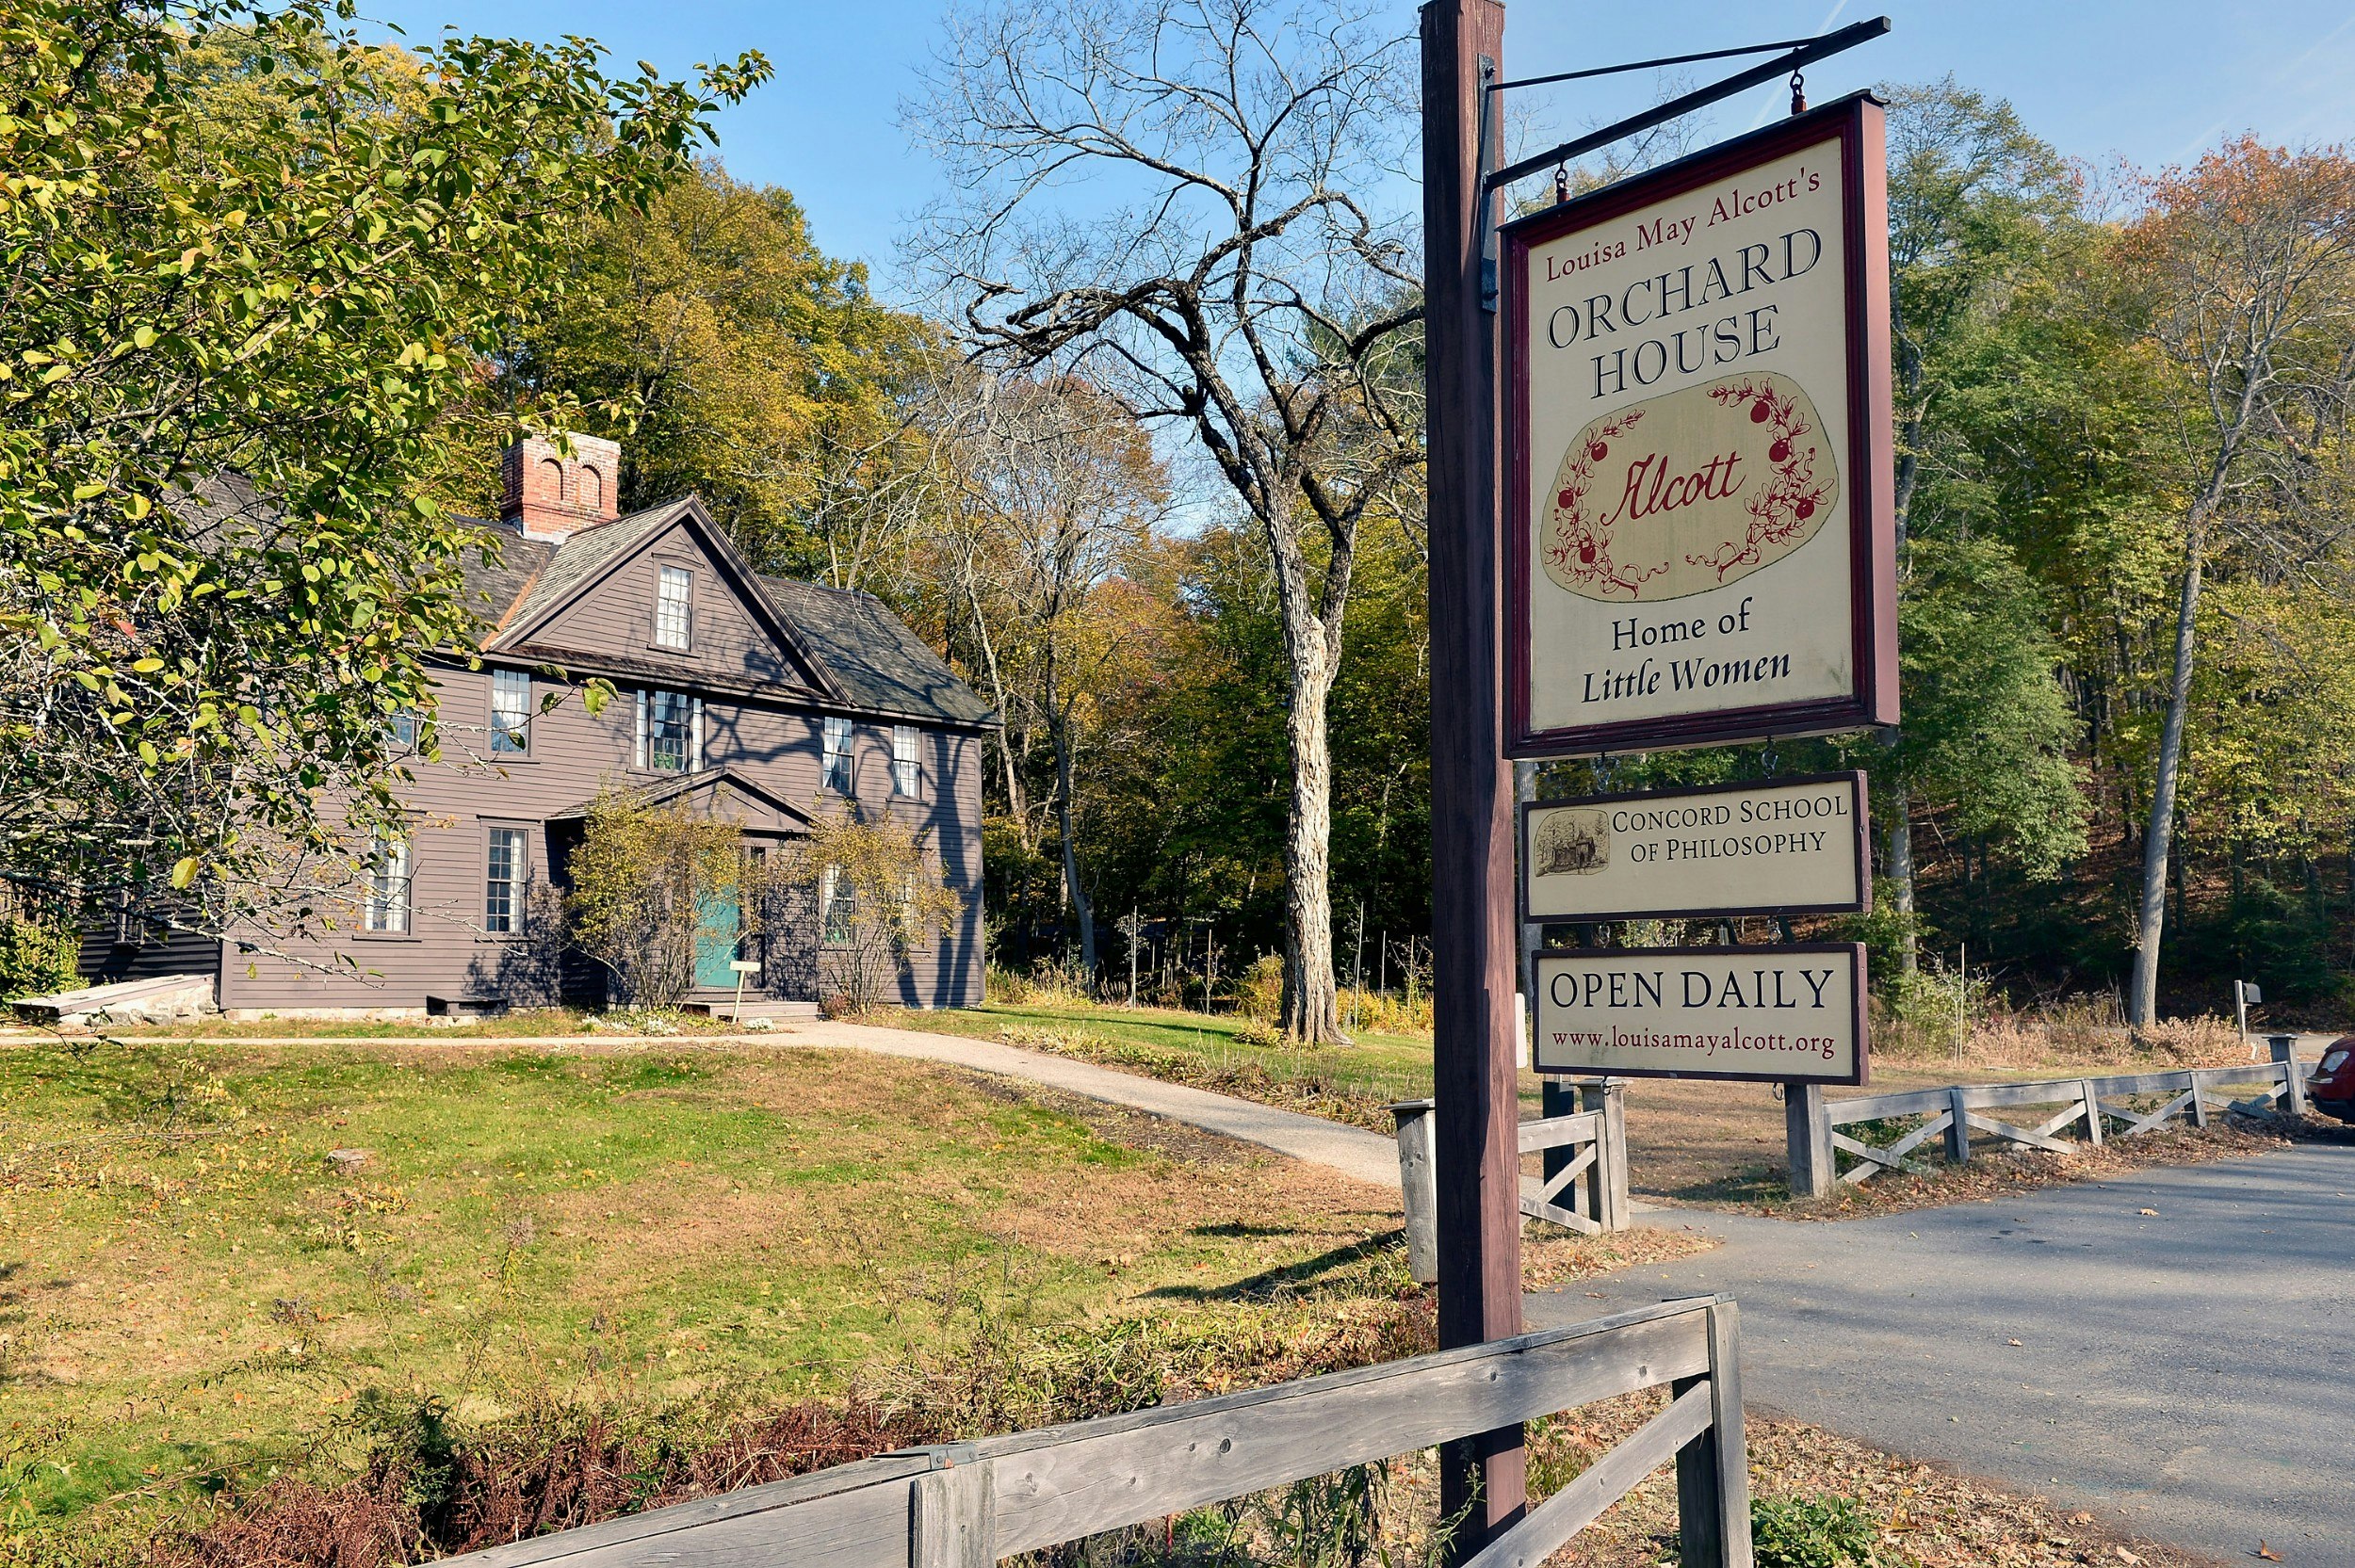 The Orchard House in Concord is the home of Louisa May Alcott